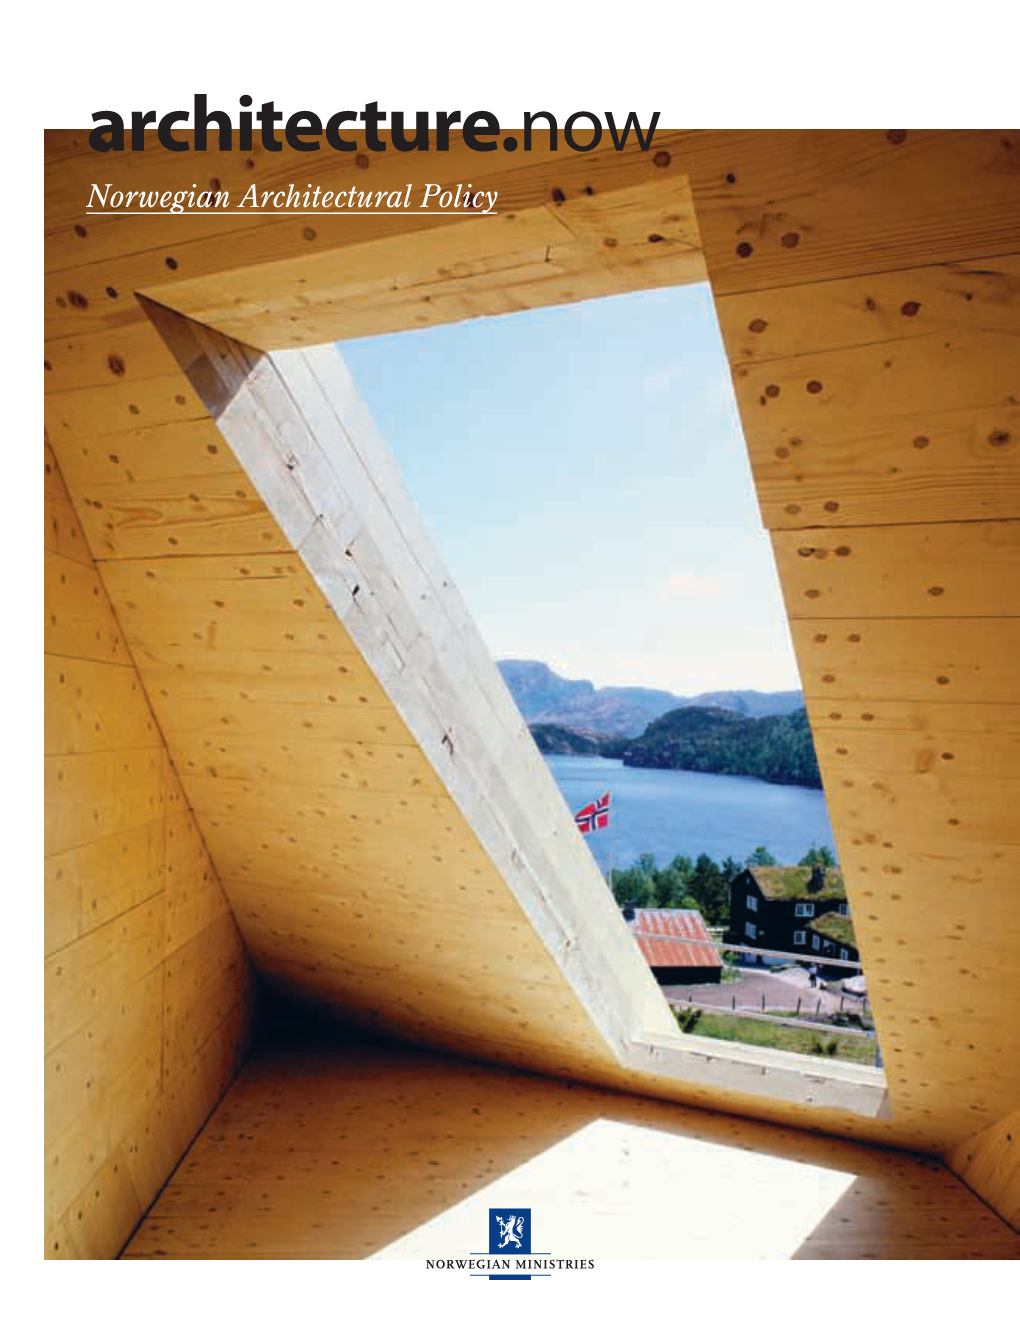 Norwegian Architectural Policy. Architecture.Now